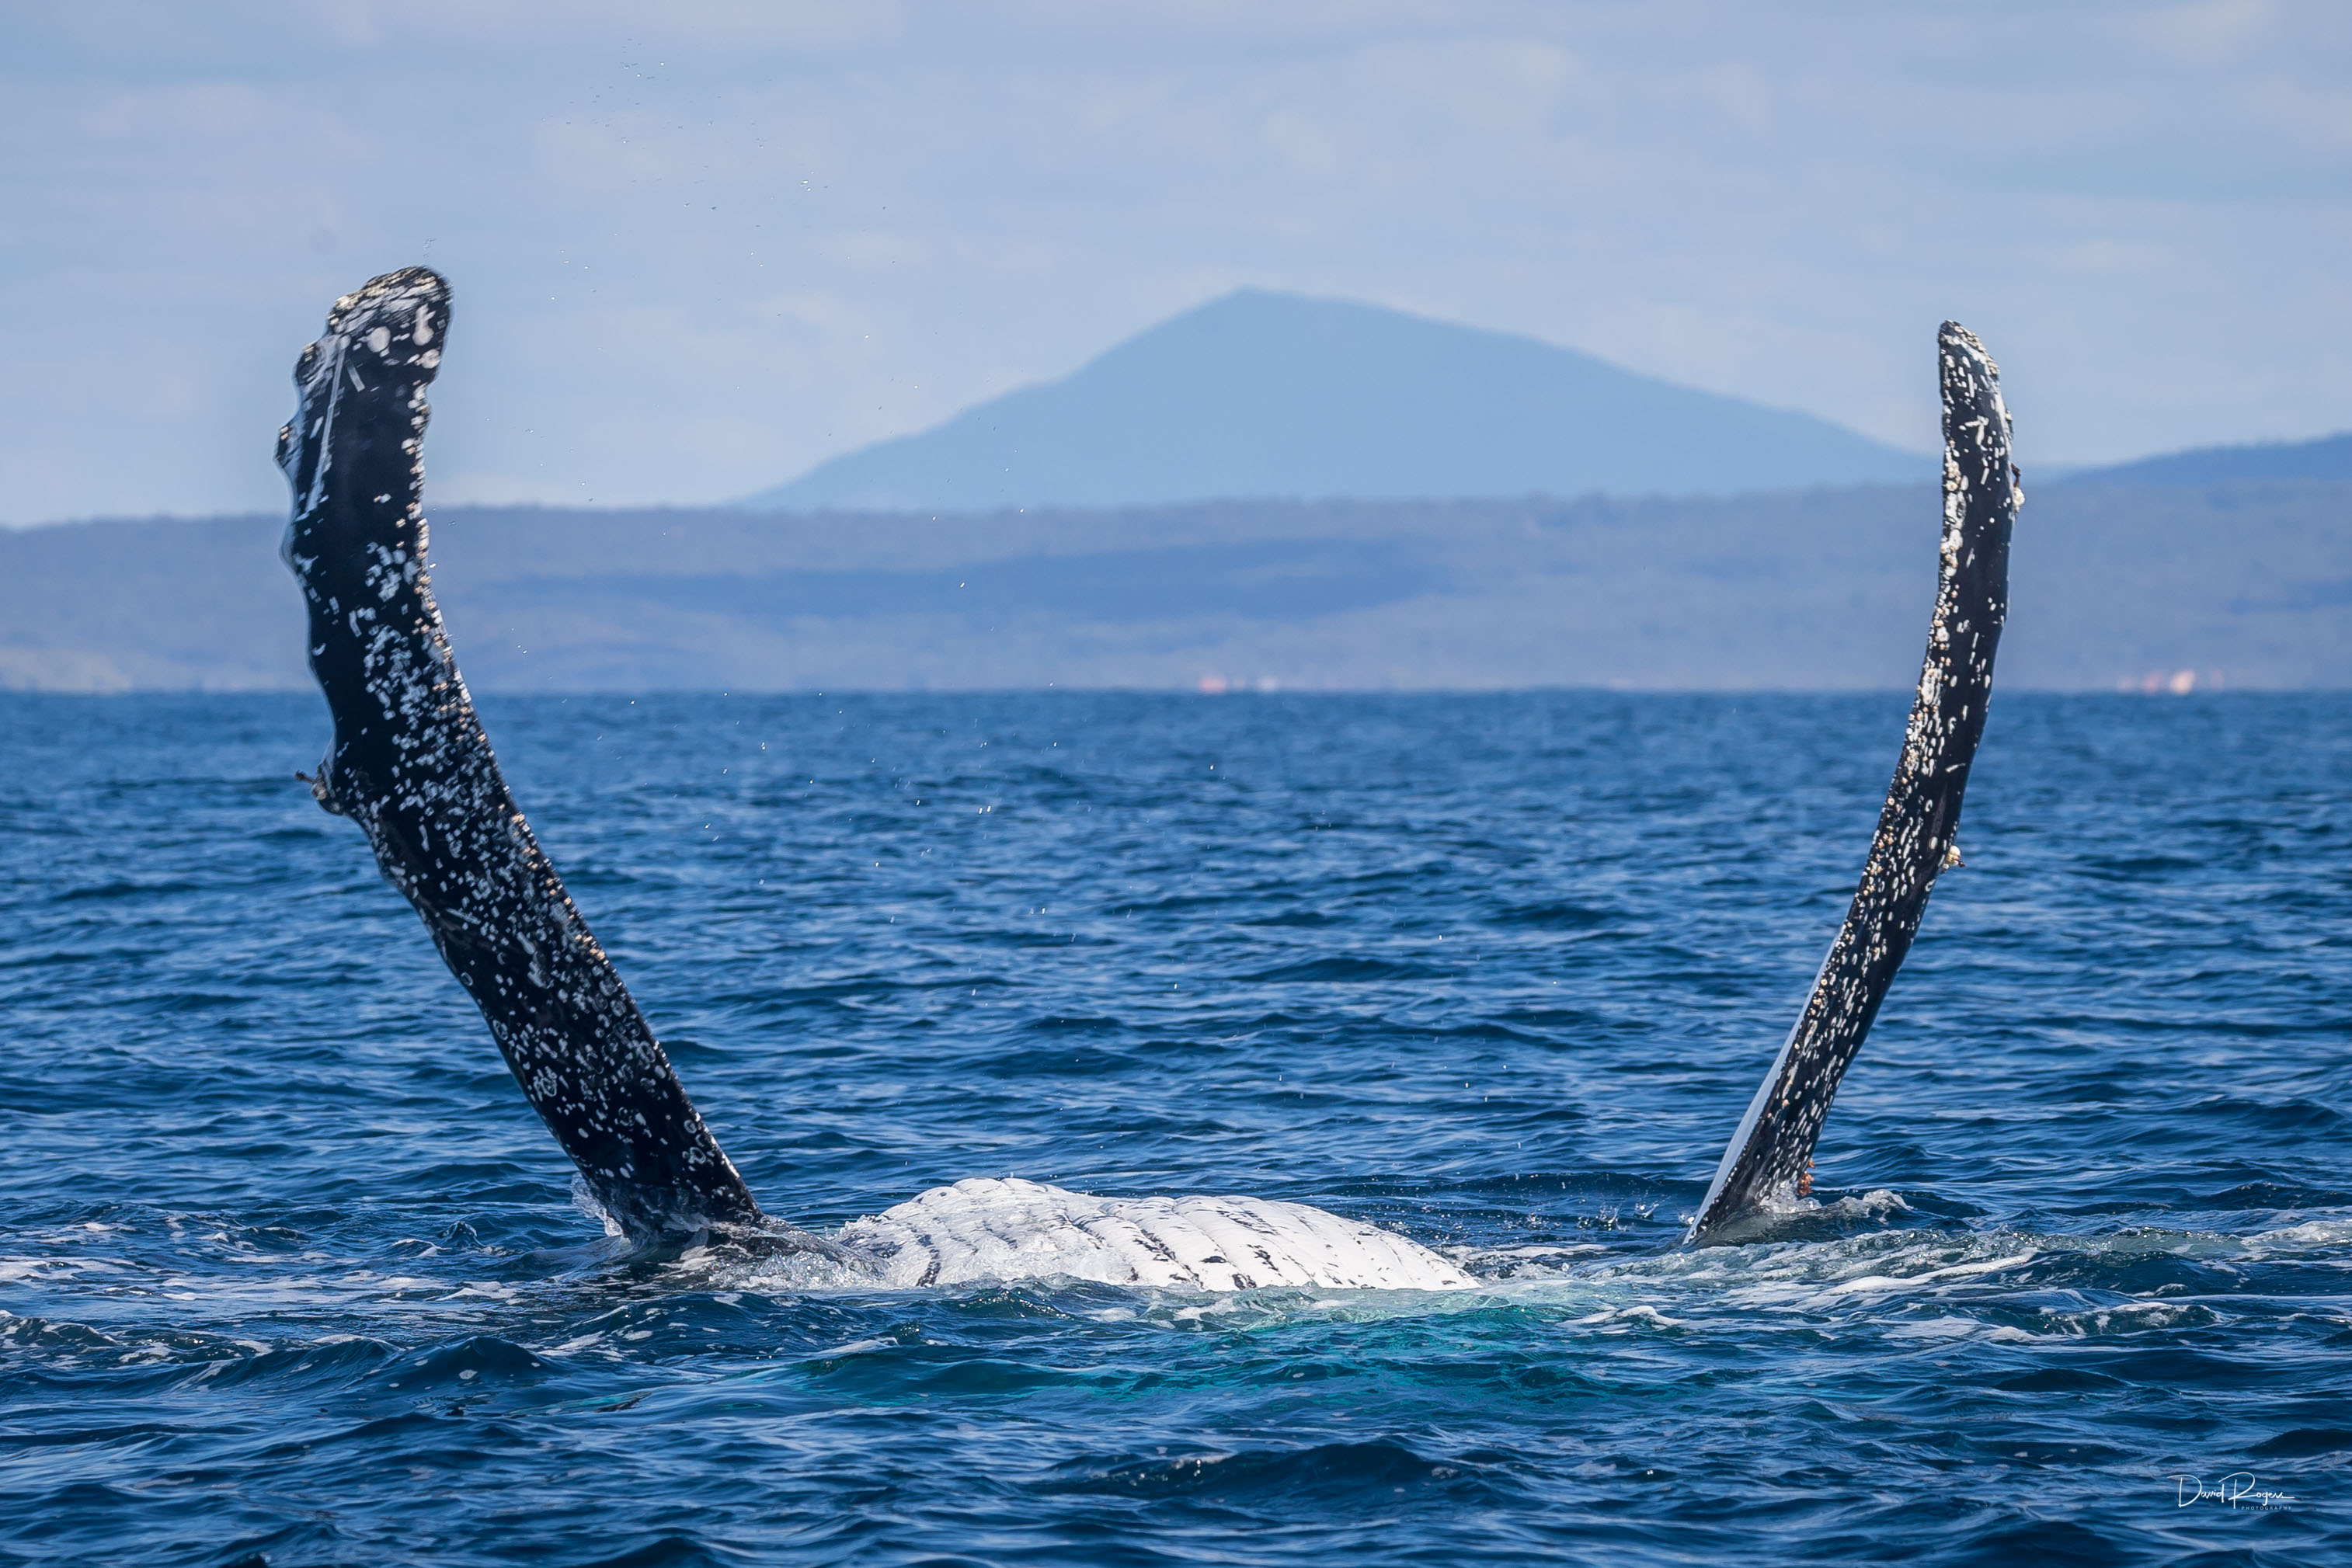 PHOTO GALLERY - A true life experience, whale watching on the Sapphire Coast